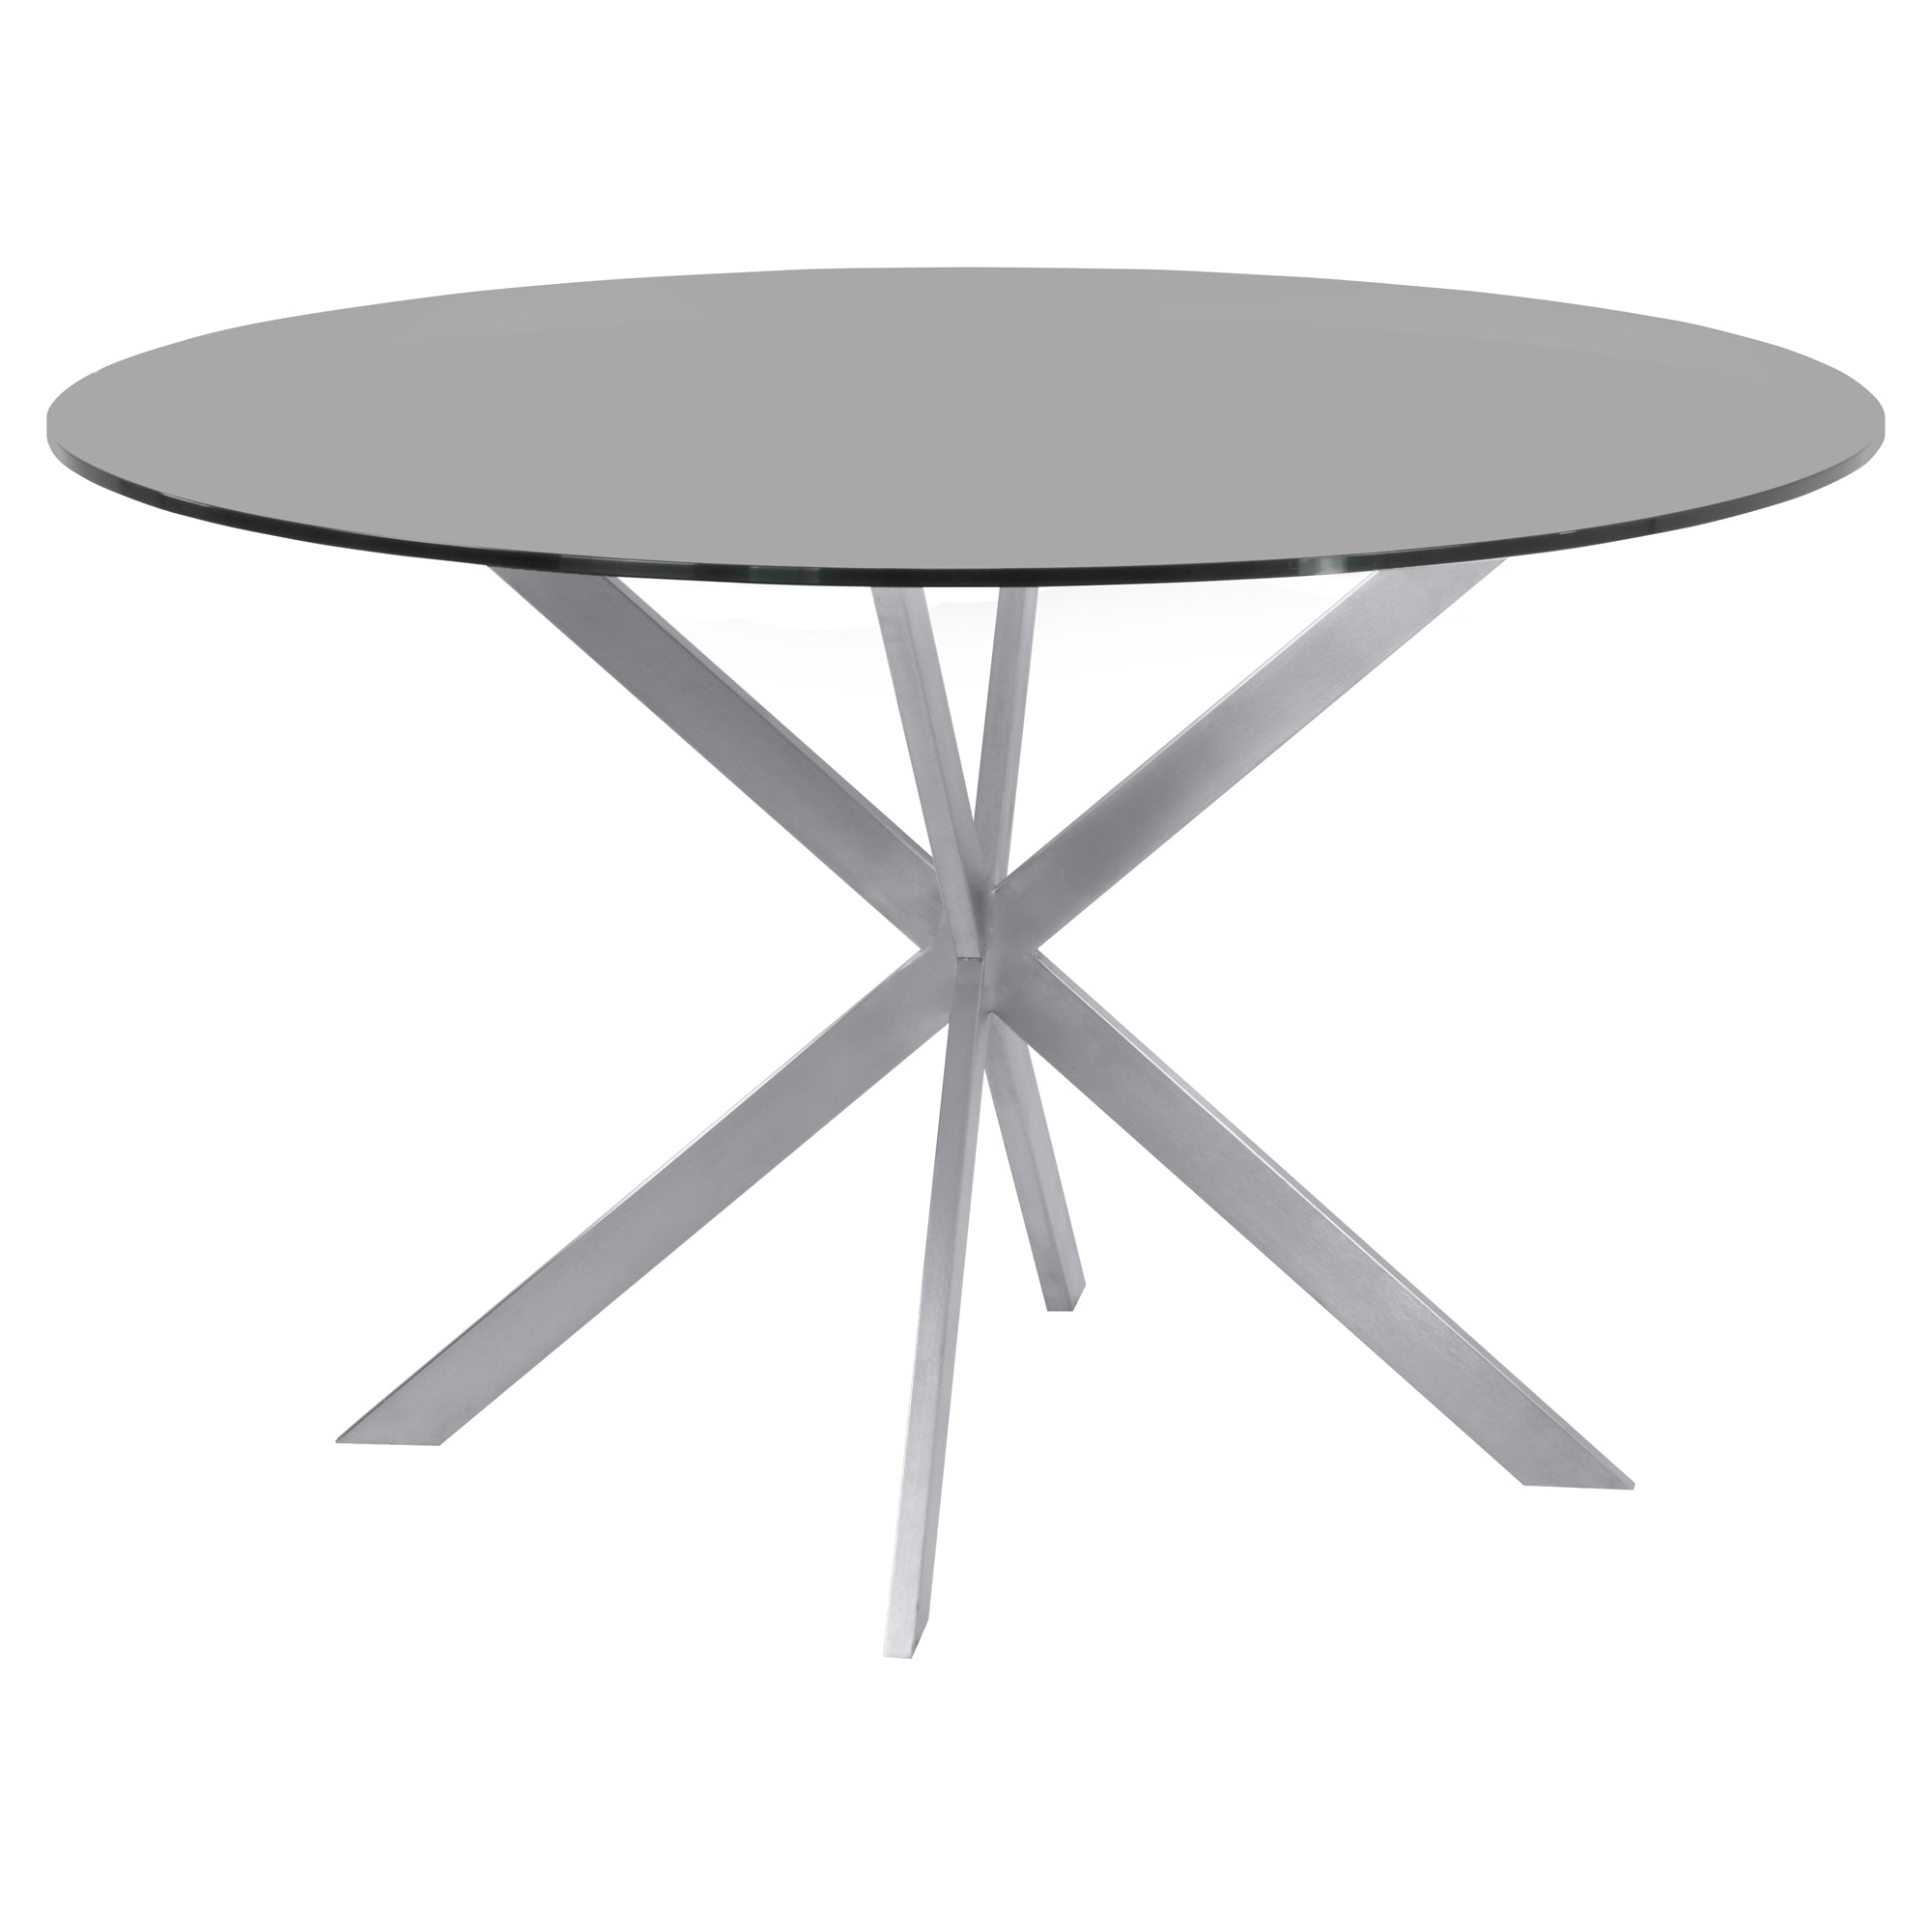 Armen Living Lcmyditogrey Mystere Round Dining Table In Brushed Stainless Steel With Gray Tempered Glass Top